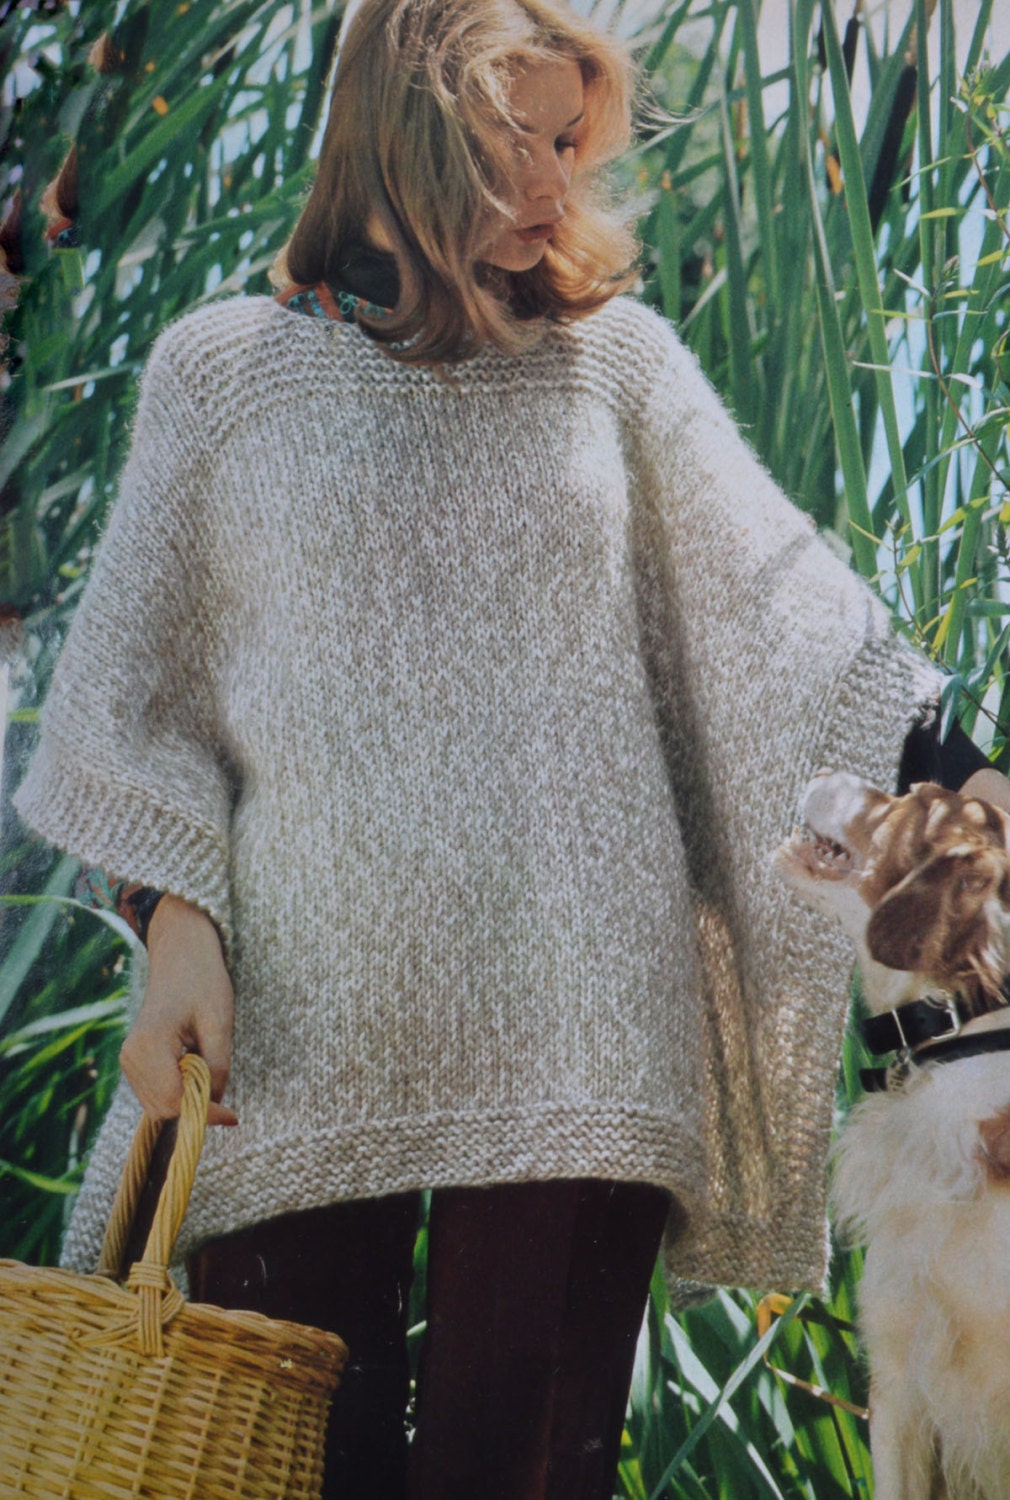 Simple poncho pdf cover up adult woman's vintage knitting ...